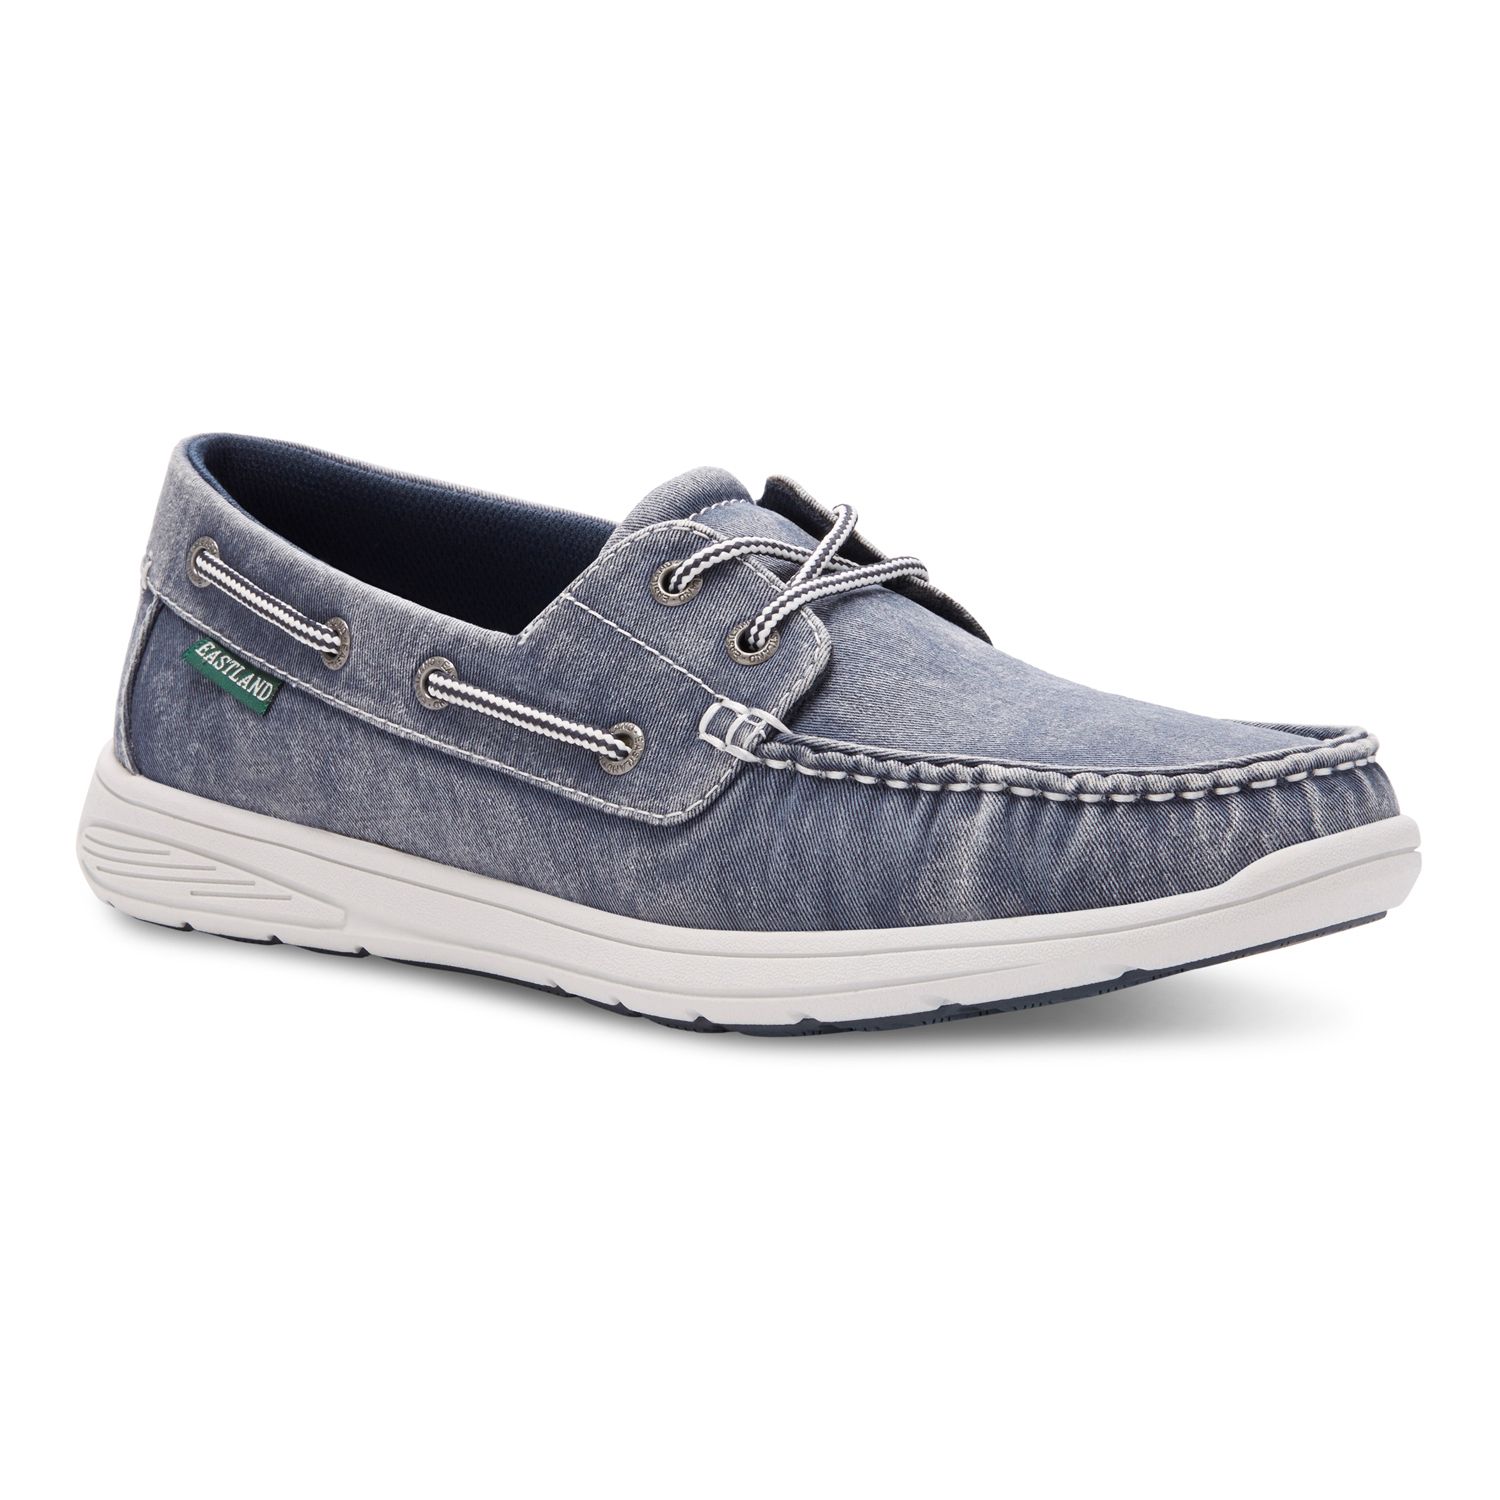 navy blue boat shoes